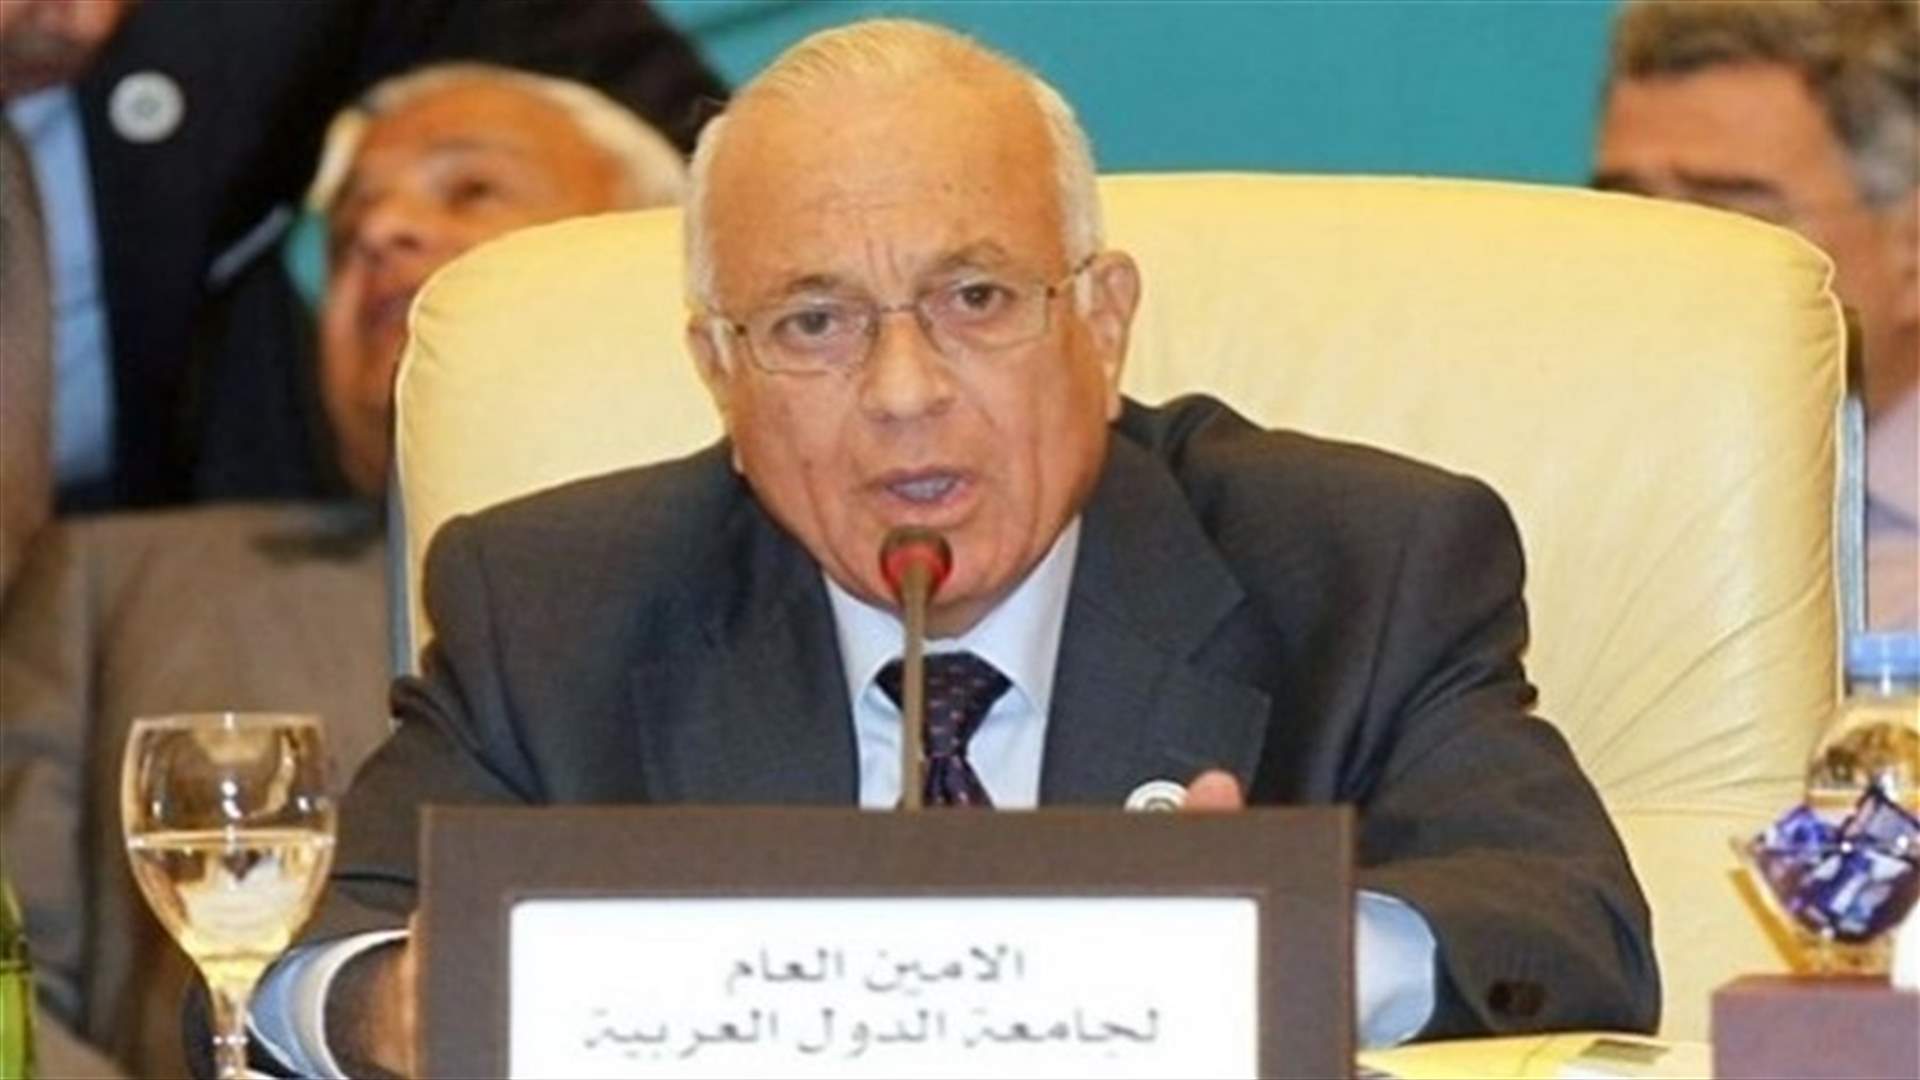 Arab League chief says will not seek new term -state news agency